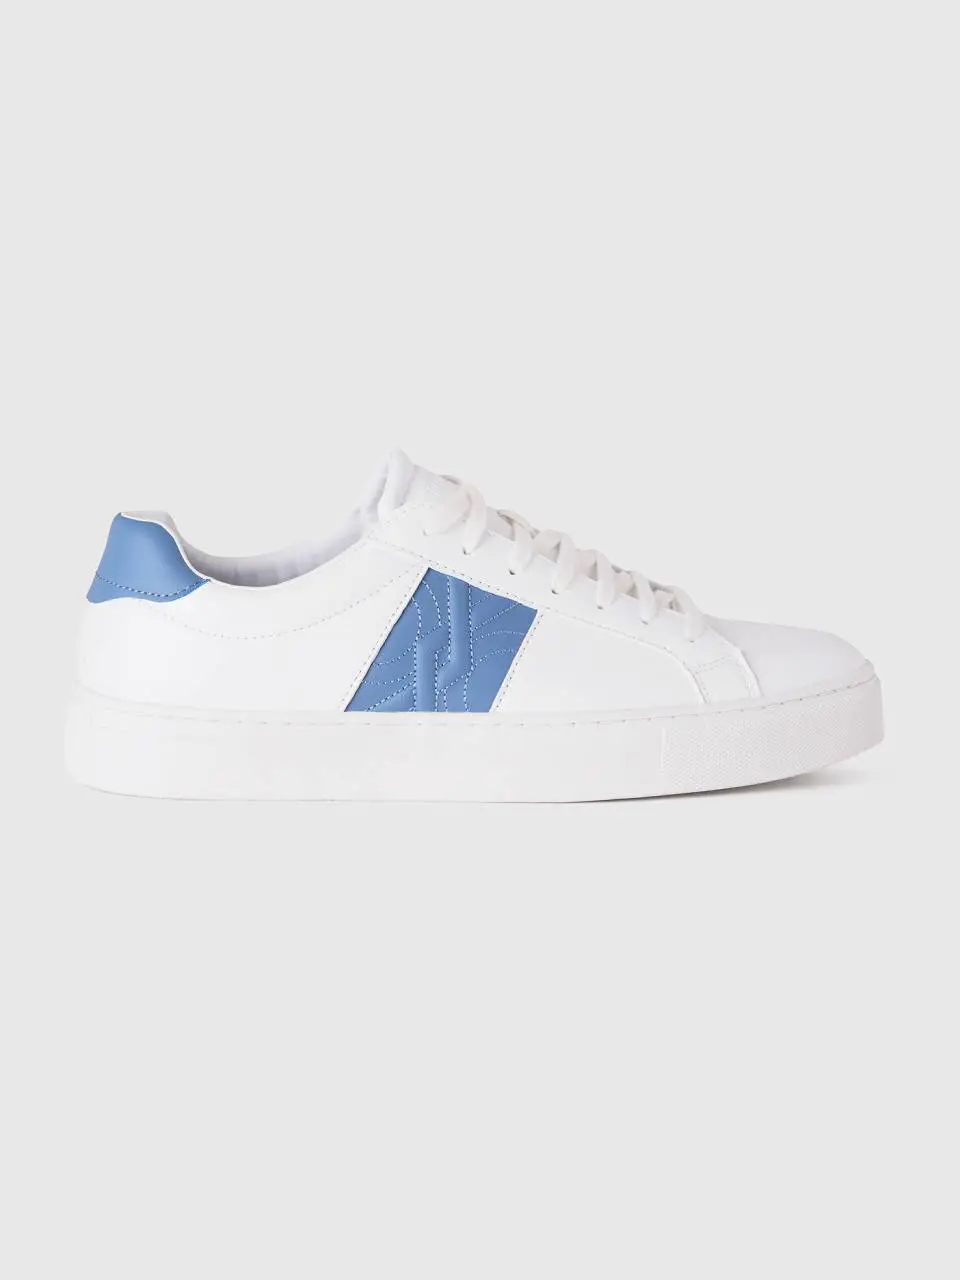 Benetton low-top sneakers with sky blue logo. 1